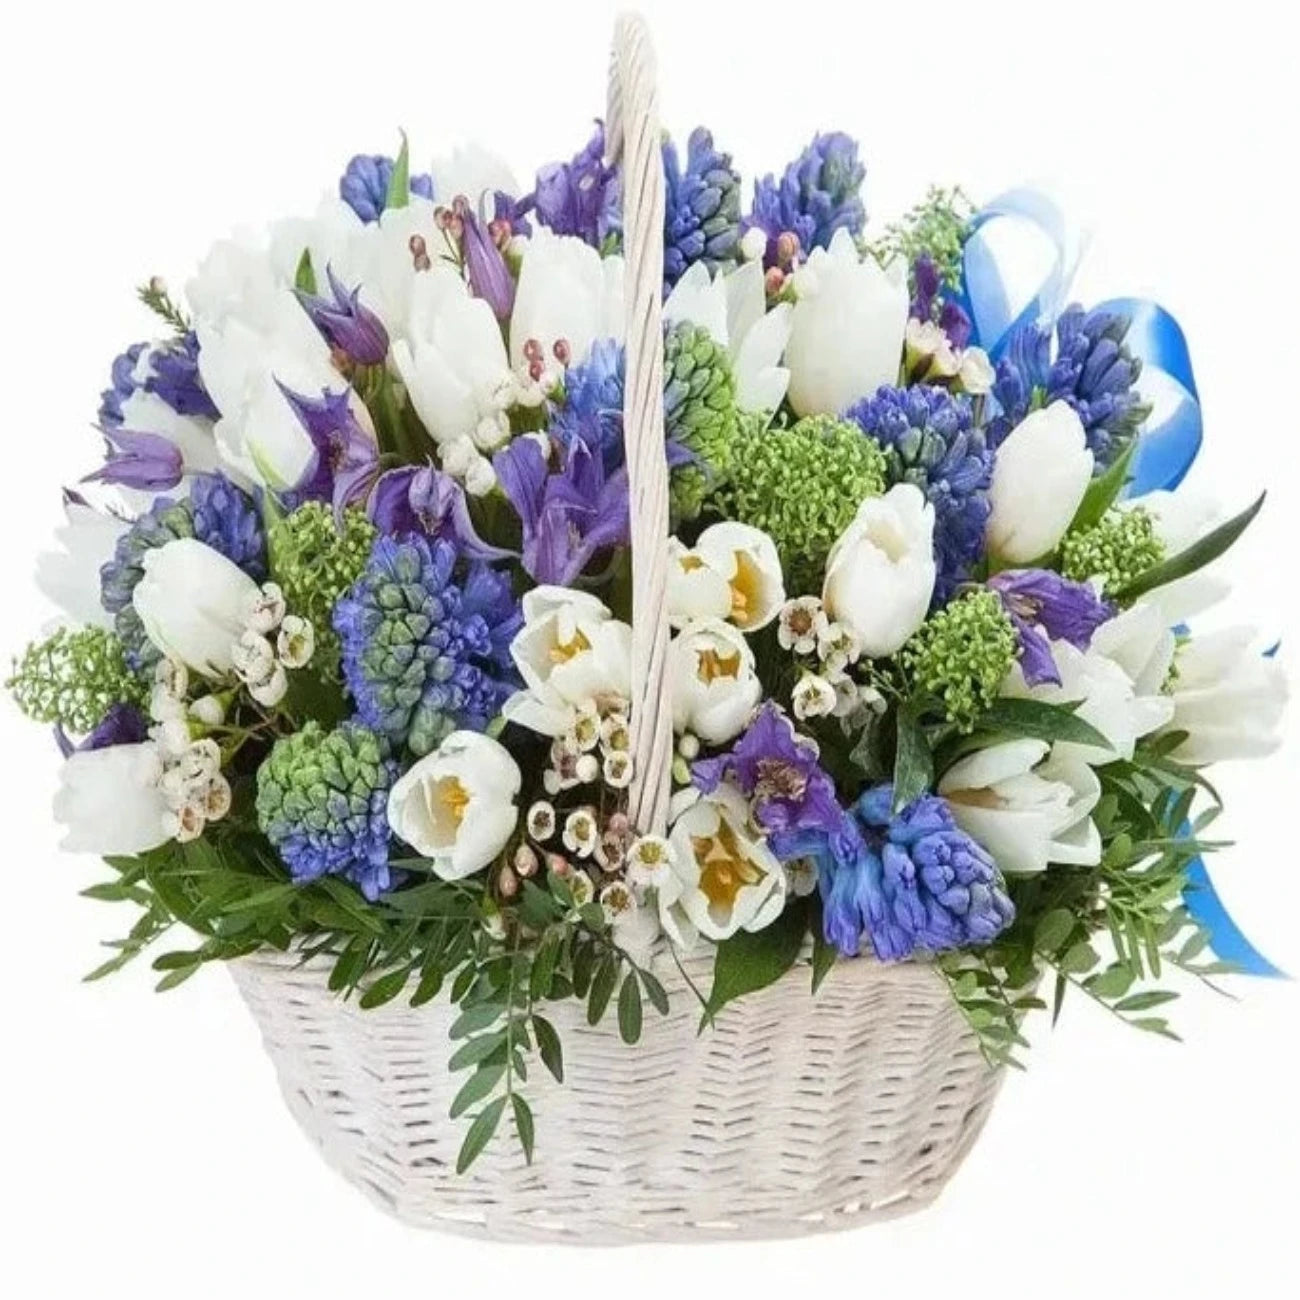 Basket of Blue and White Flowers